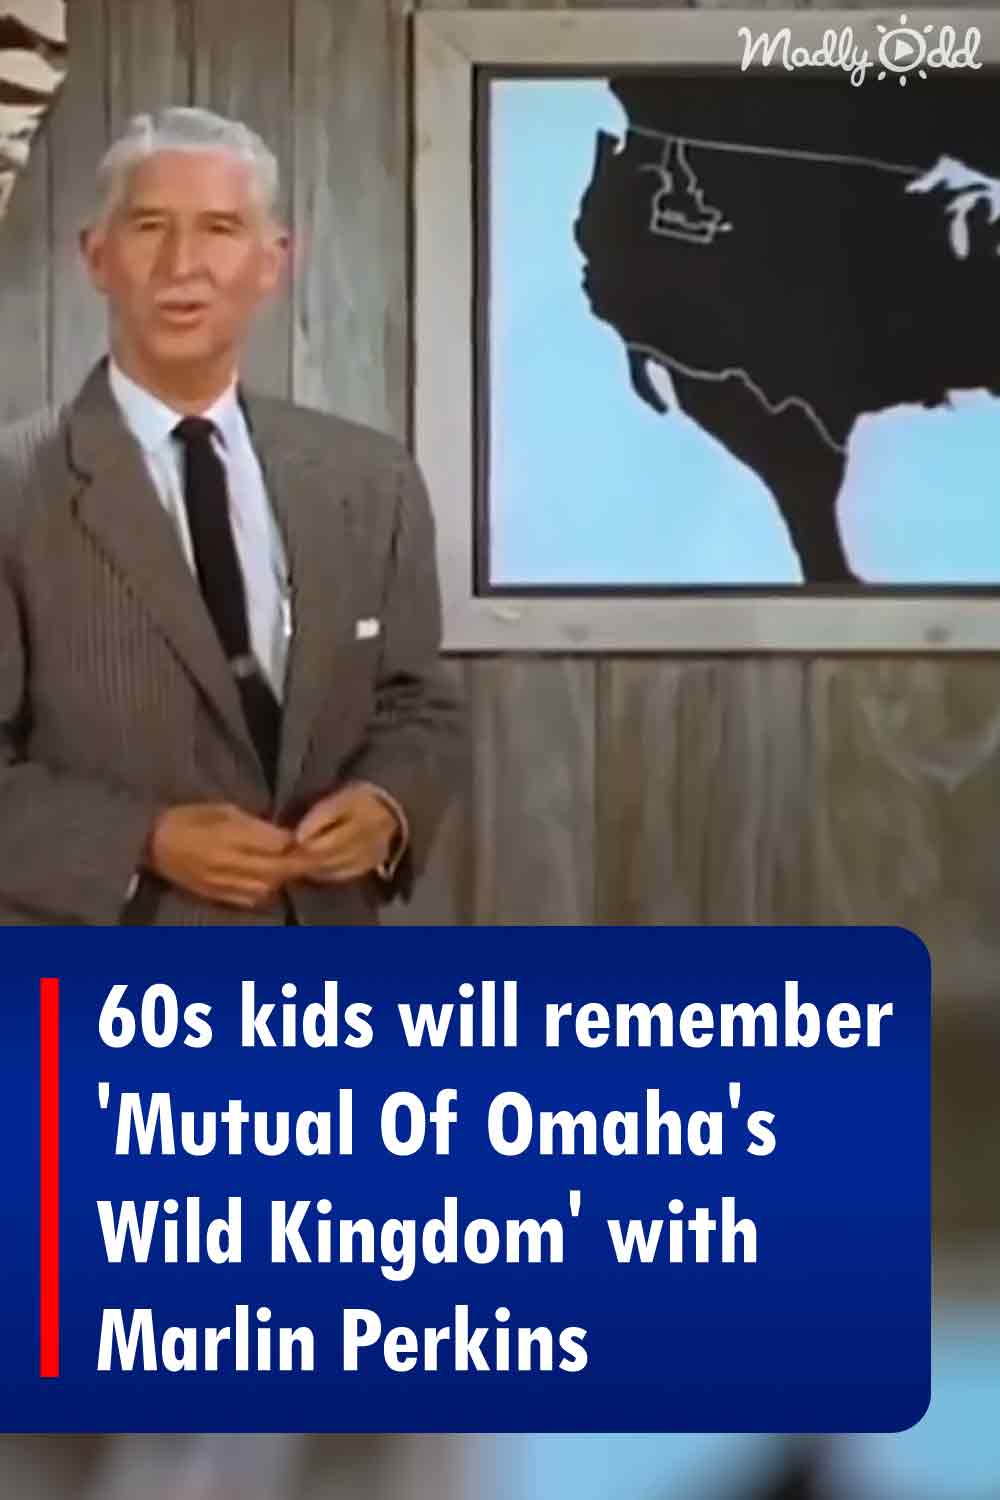 60s kids will remember \'Mutual Of Omaha\'s Wild Kingdom\' with Marlin Perkins